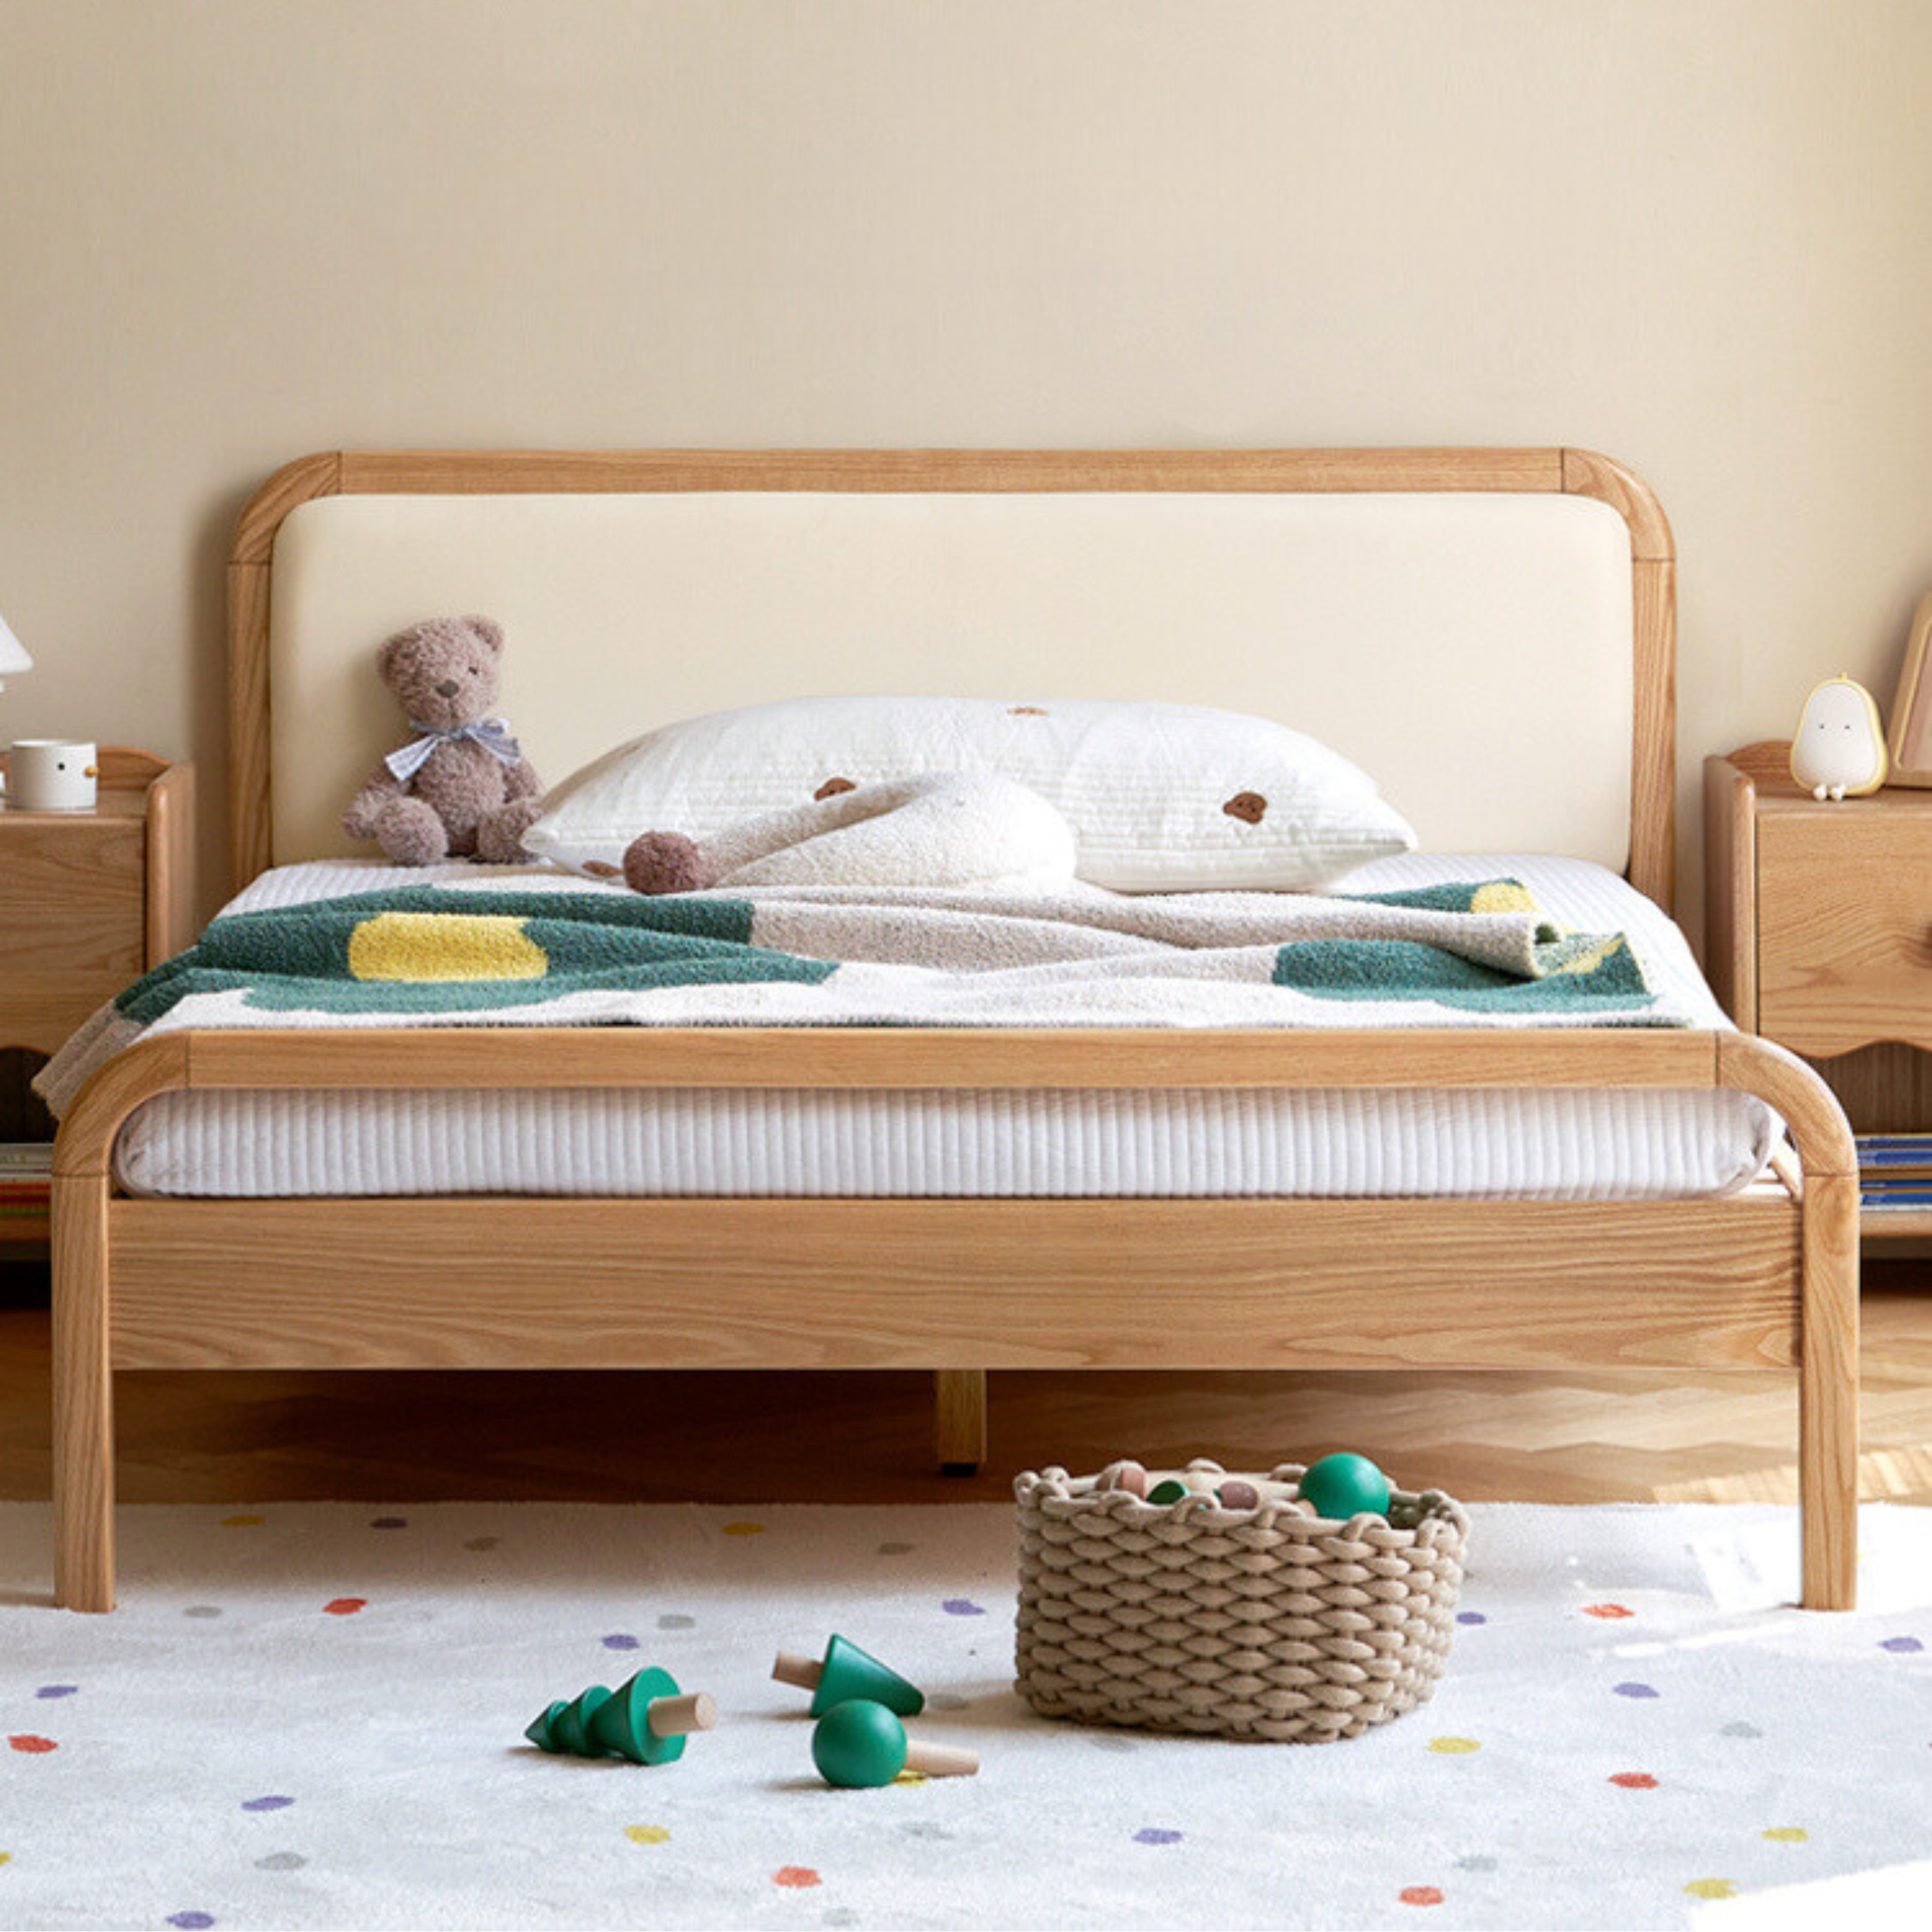 Oak solid wood children's bed with organic leather")